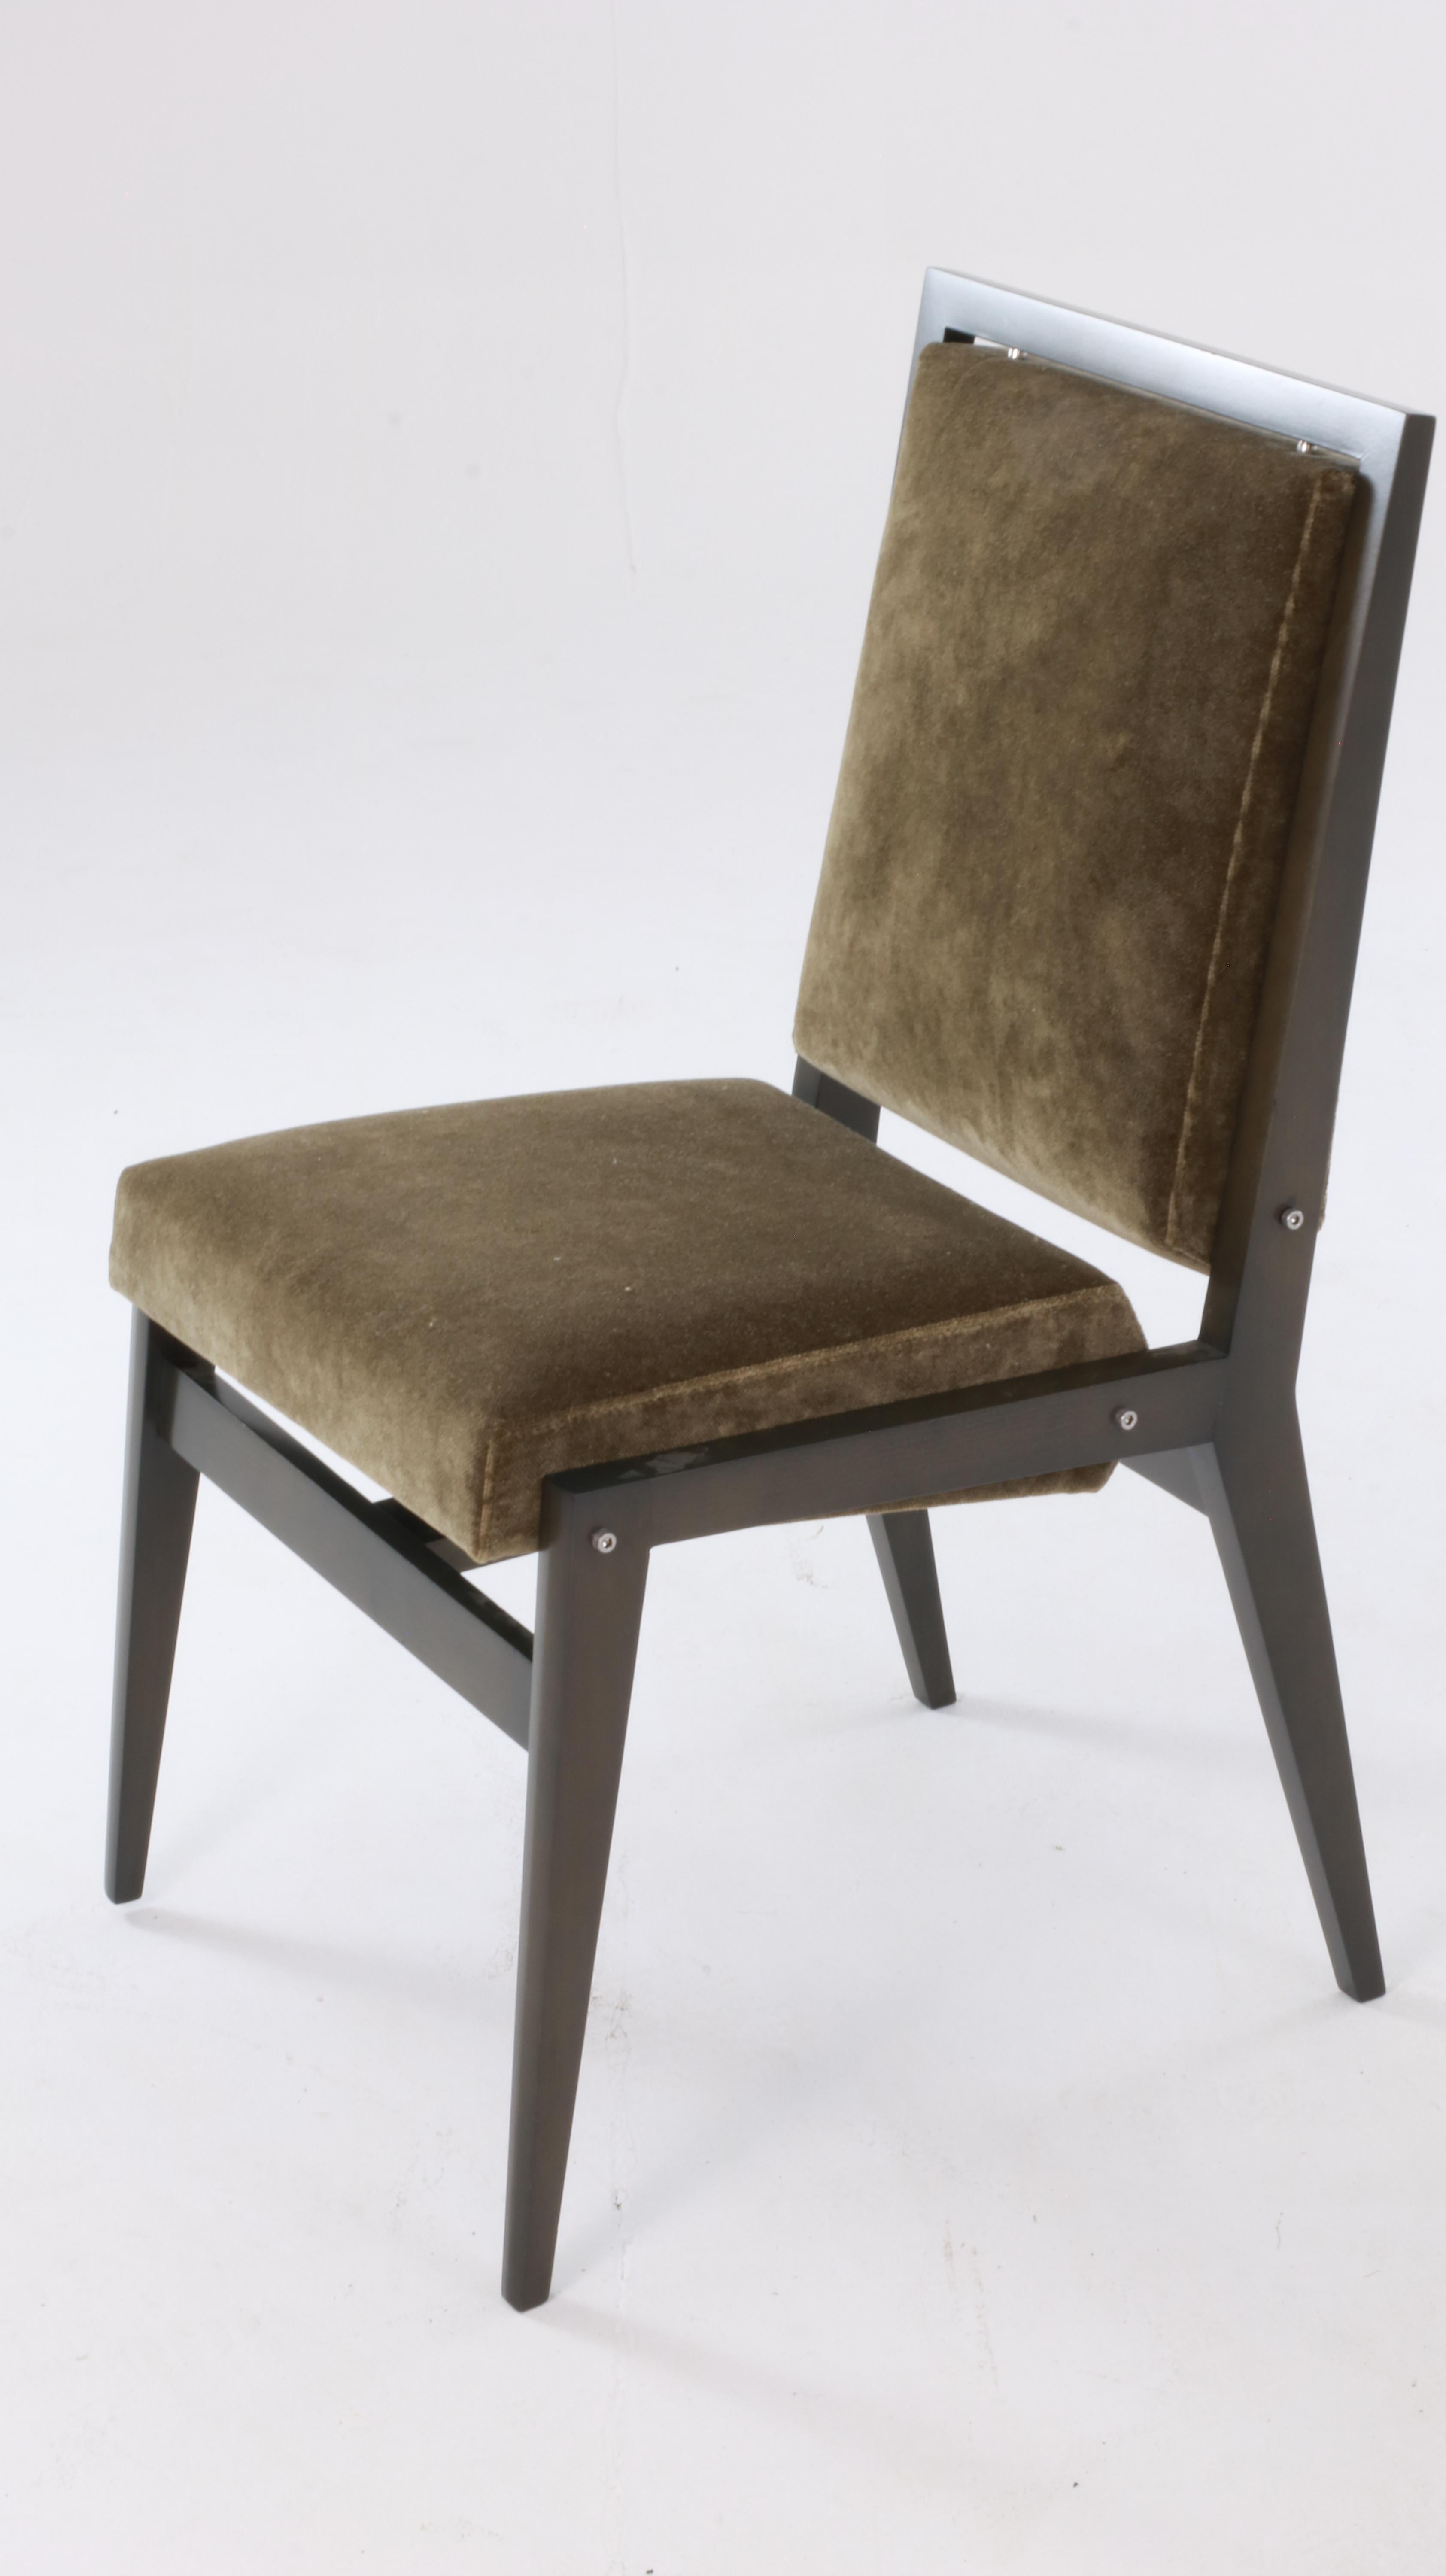 Council chair by Maxime Old, a contemporary  edition by the Anne Jacquemin Sablon gallery. The base of this chair with salient angles is in oak, the backrest and seat are covered with fabric. The chair was designed for the City Hall of Rouen in